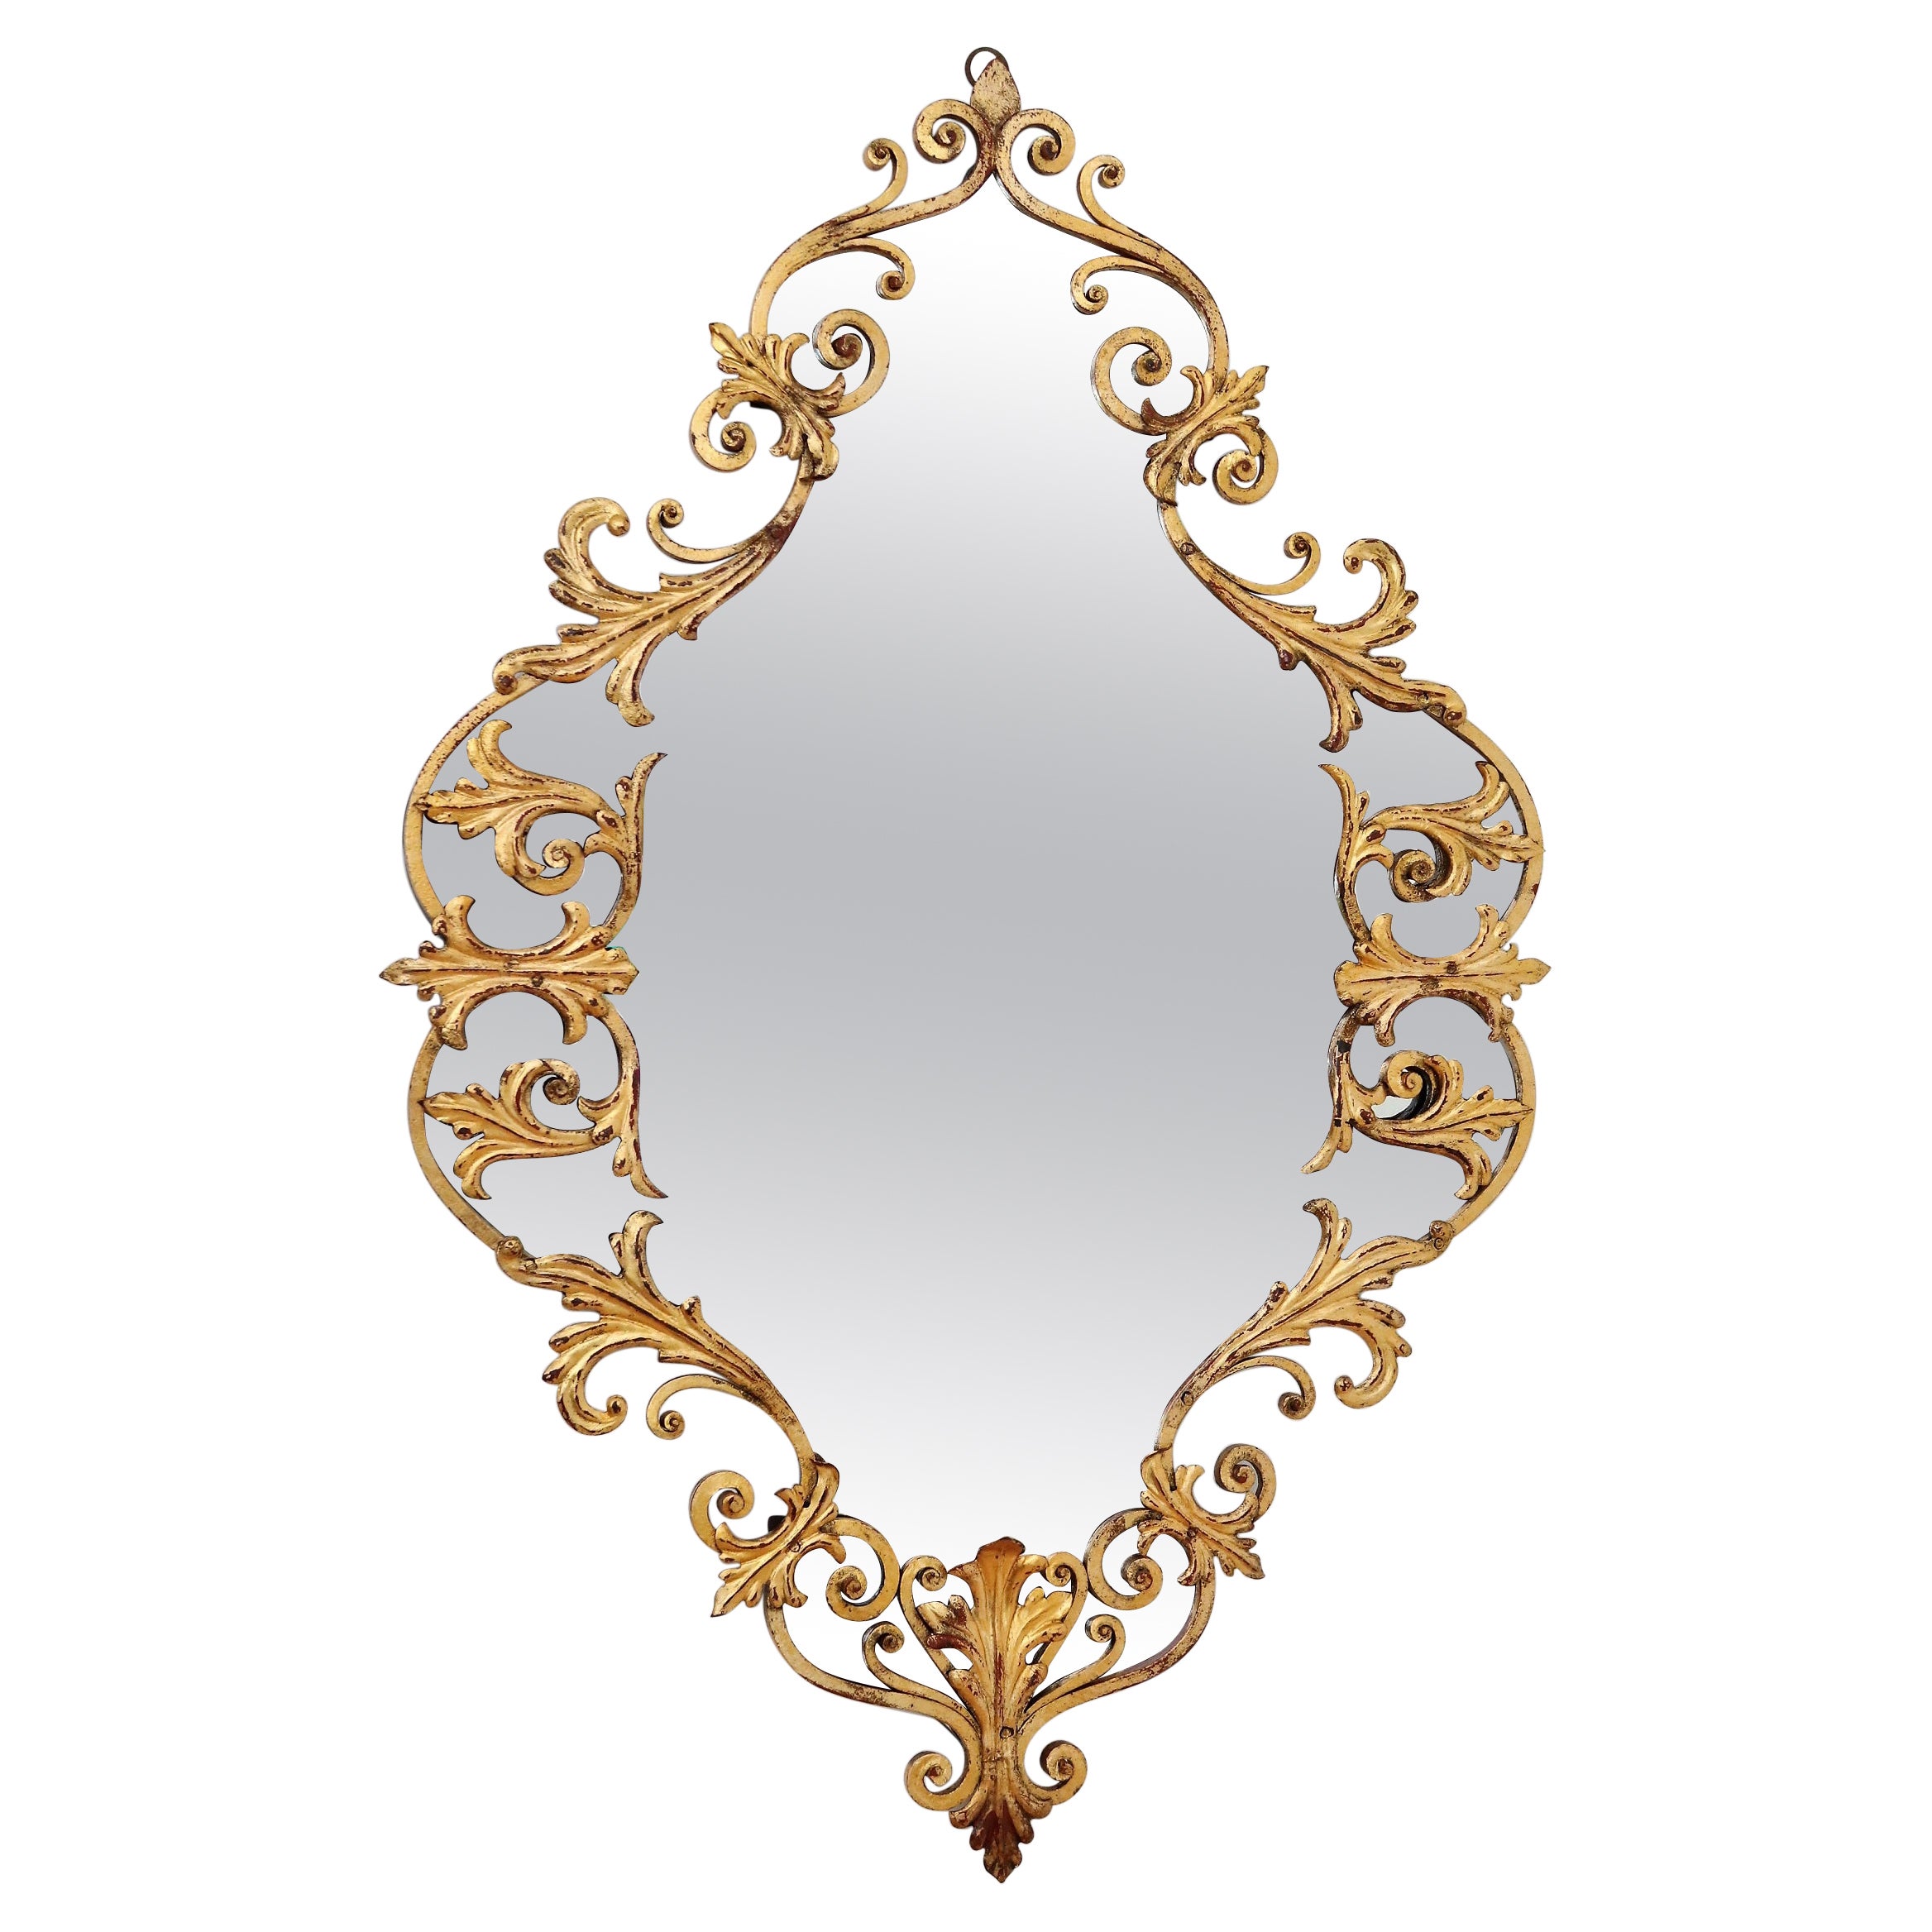 Italian Midcentury Gilt Wall Mirror Hand-Crafted in Baroque Style, Italy, 1950s